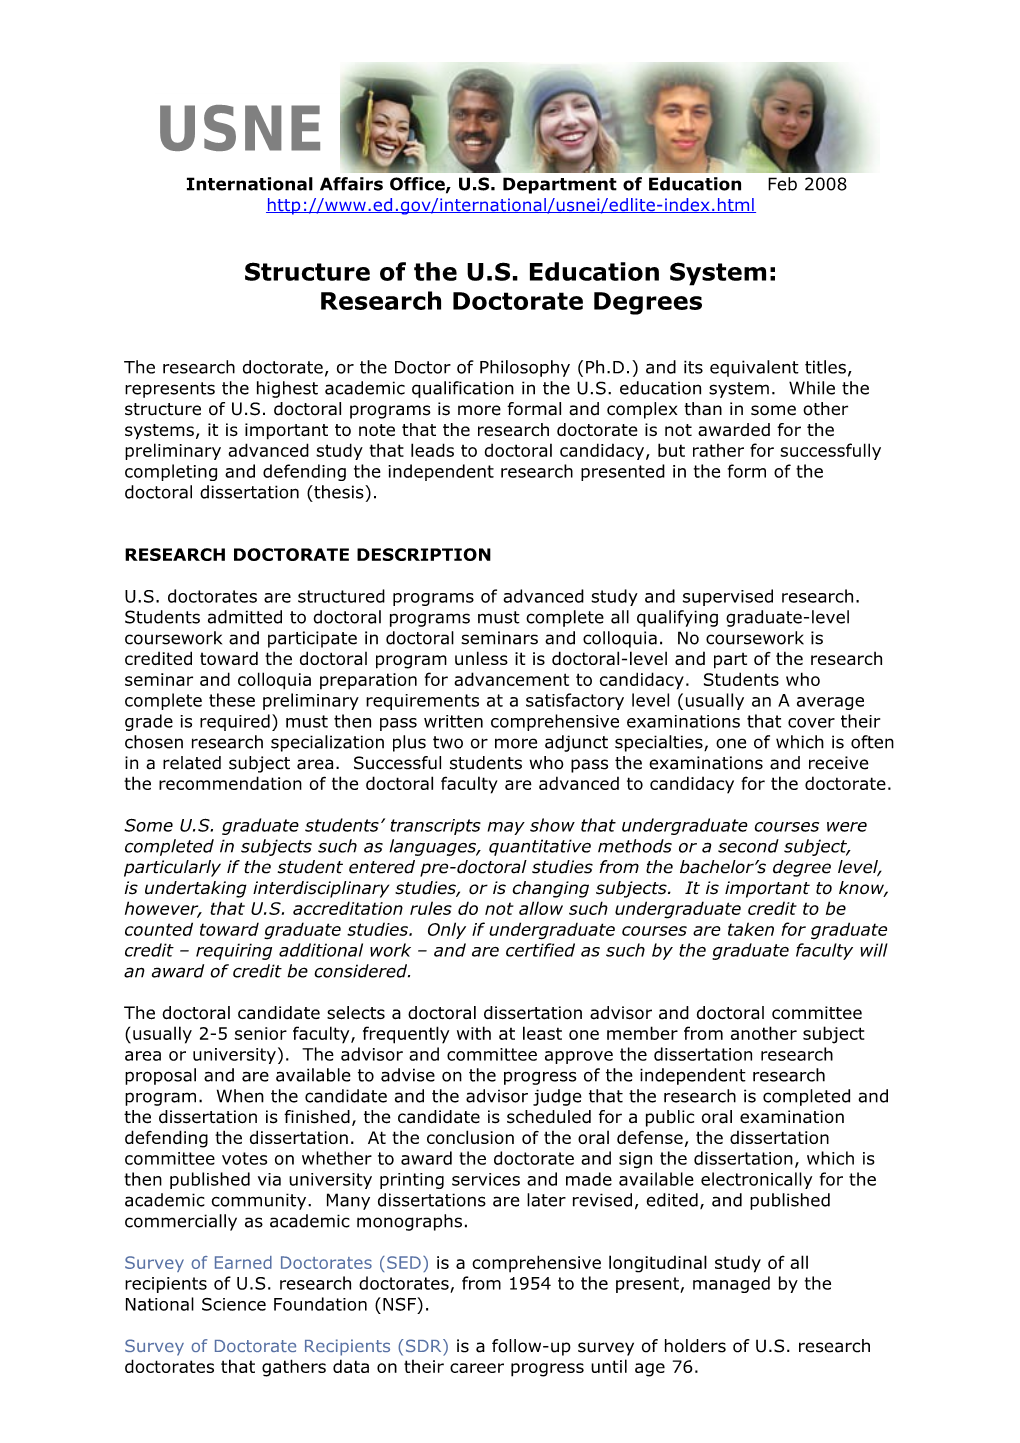 Structure of the US Education System: Research Doctorate Degrees (MS Word)